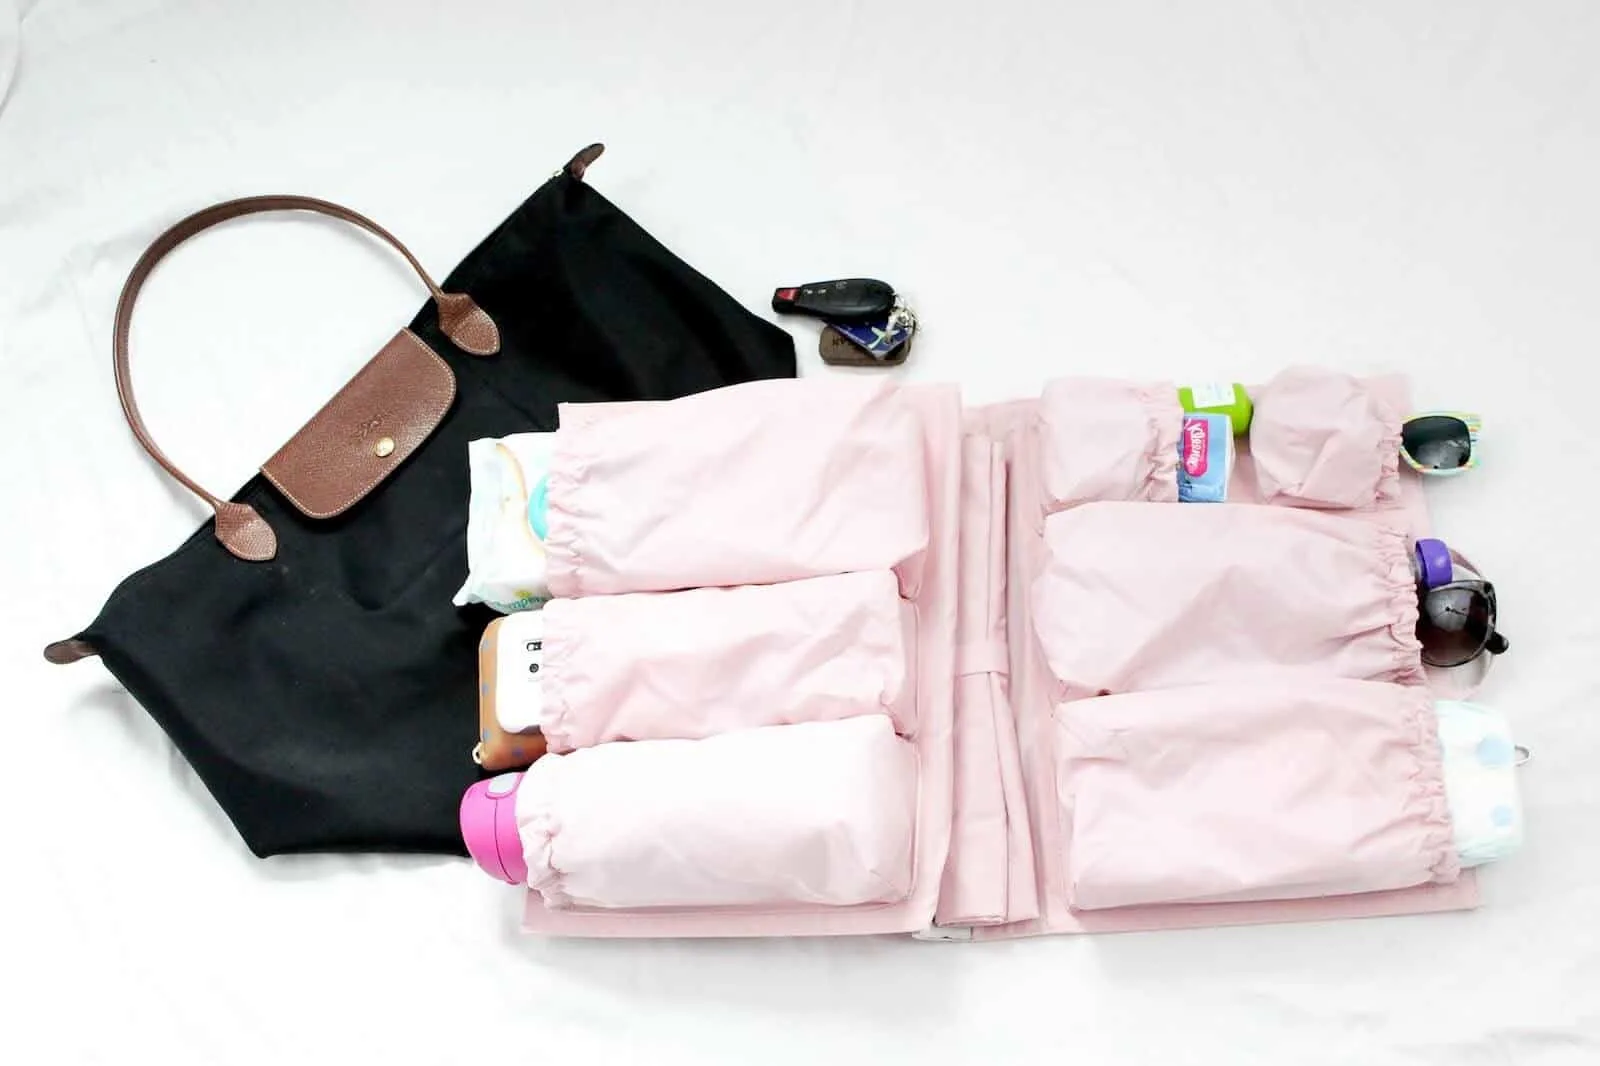 Toddler diaper bag with toddler care items.